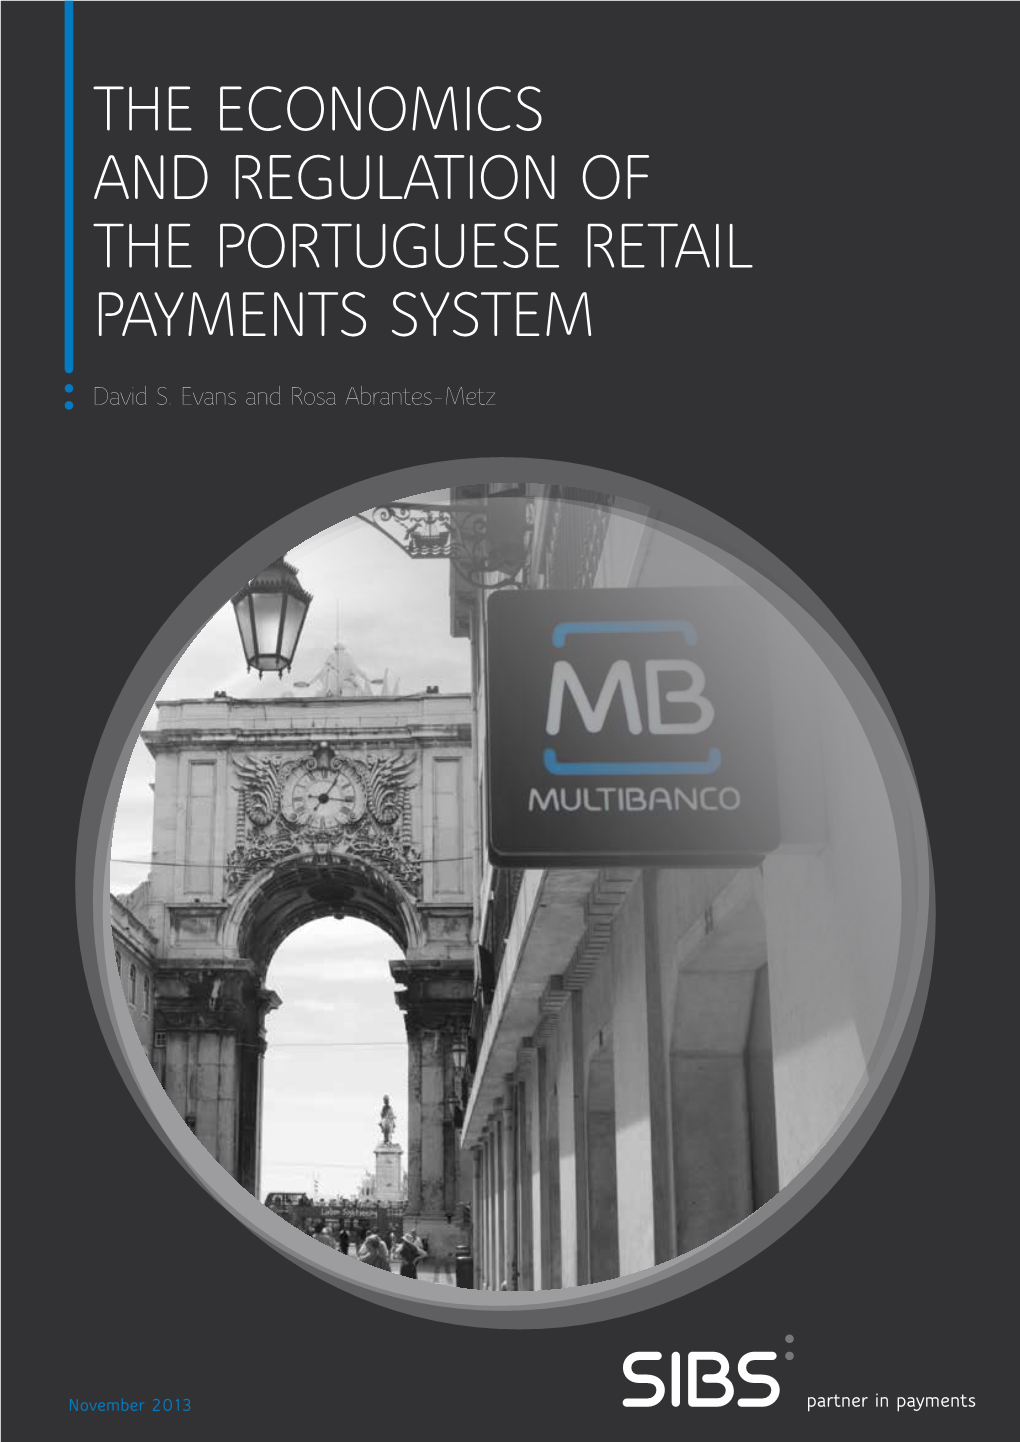 The Economics and Regulation of the Portuguese Retail Payments System